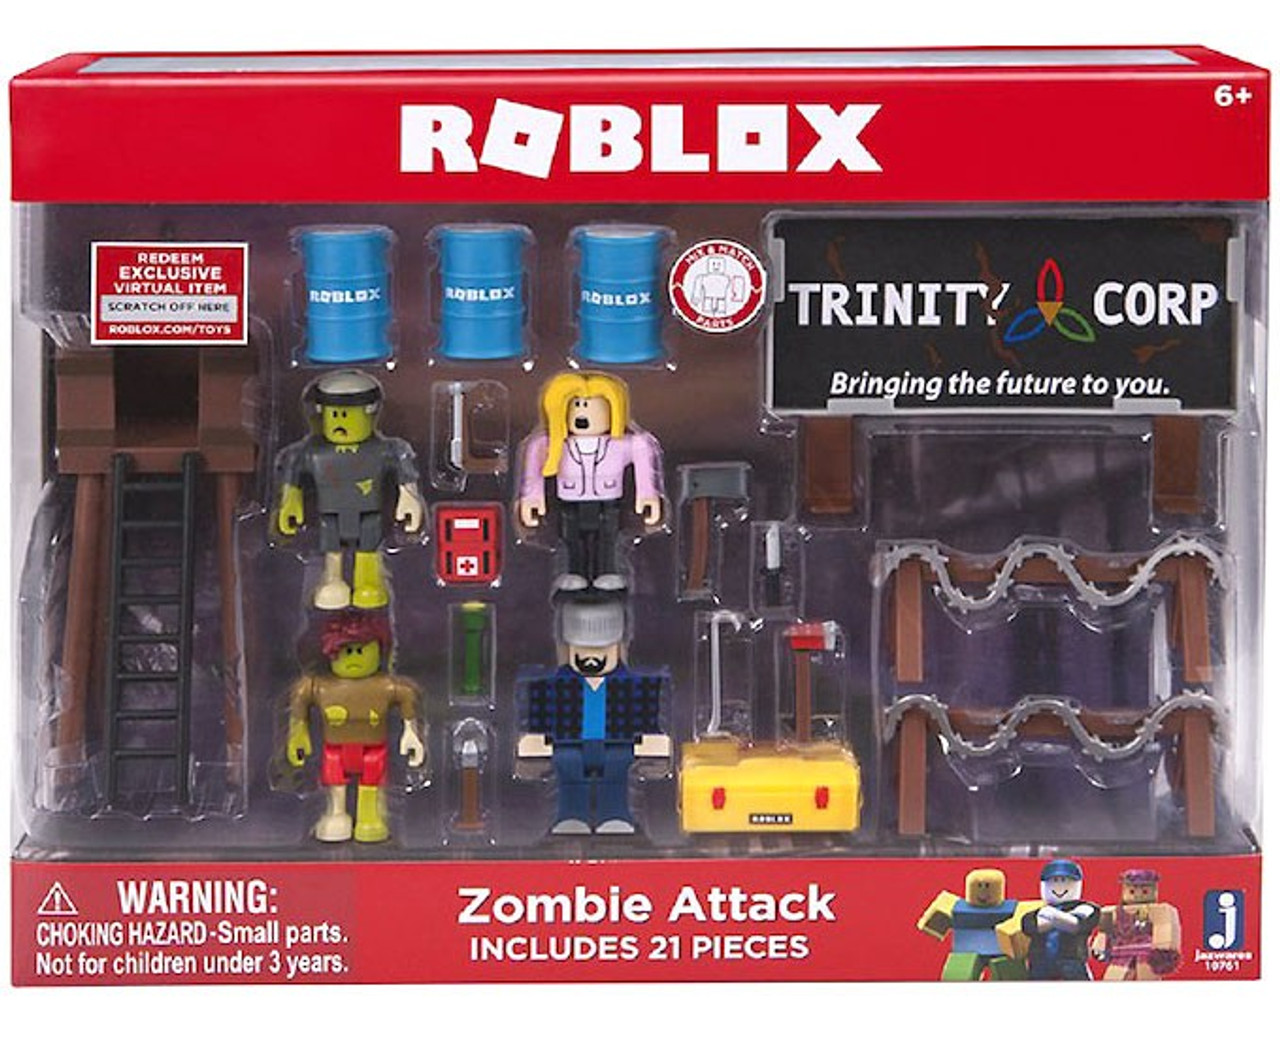 Roblox Zombie Attack 3 Playset Random Box Same Contents Damaged Package Jazwares Toywiz - build and destroy v079 3k part limit roblox